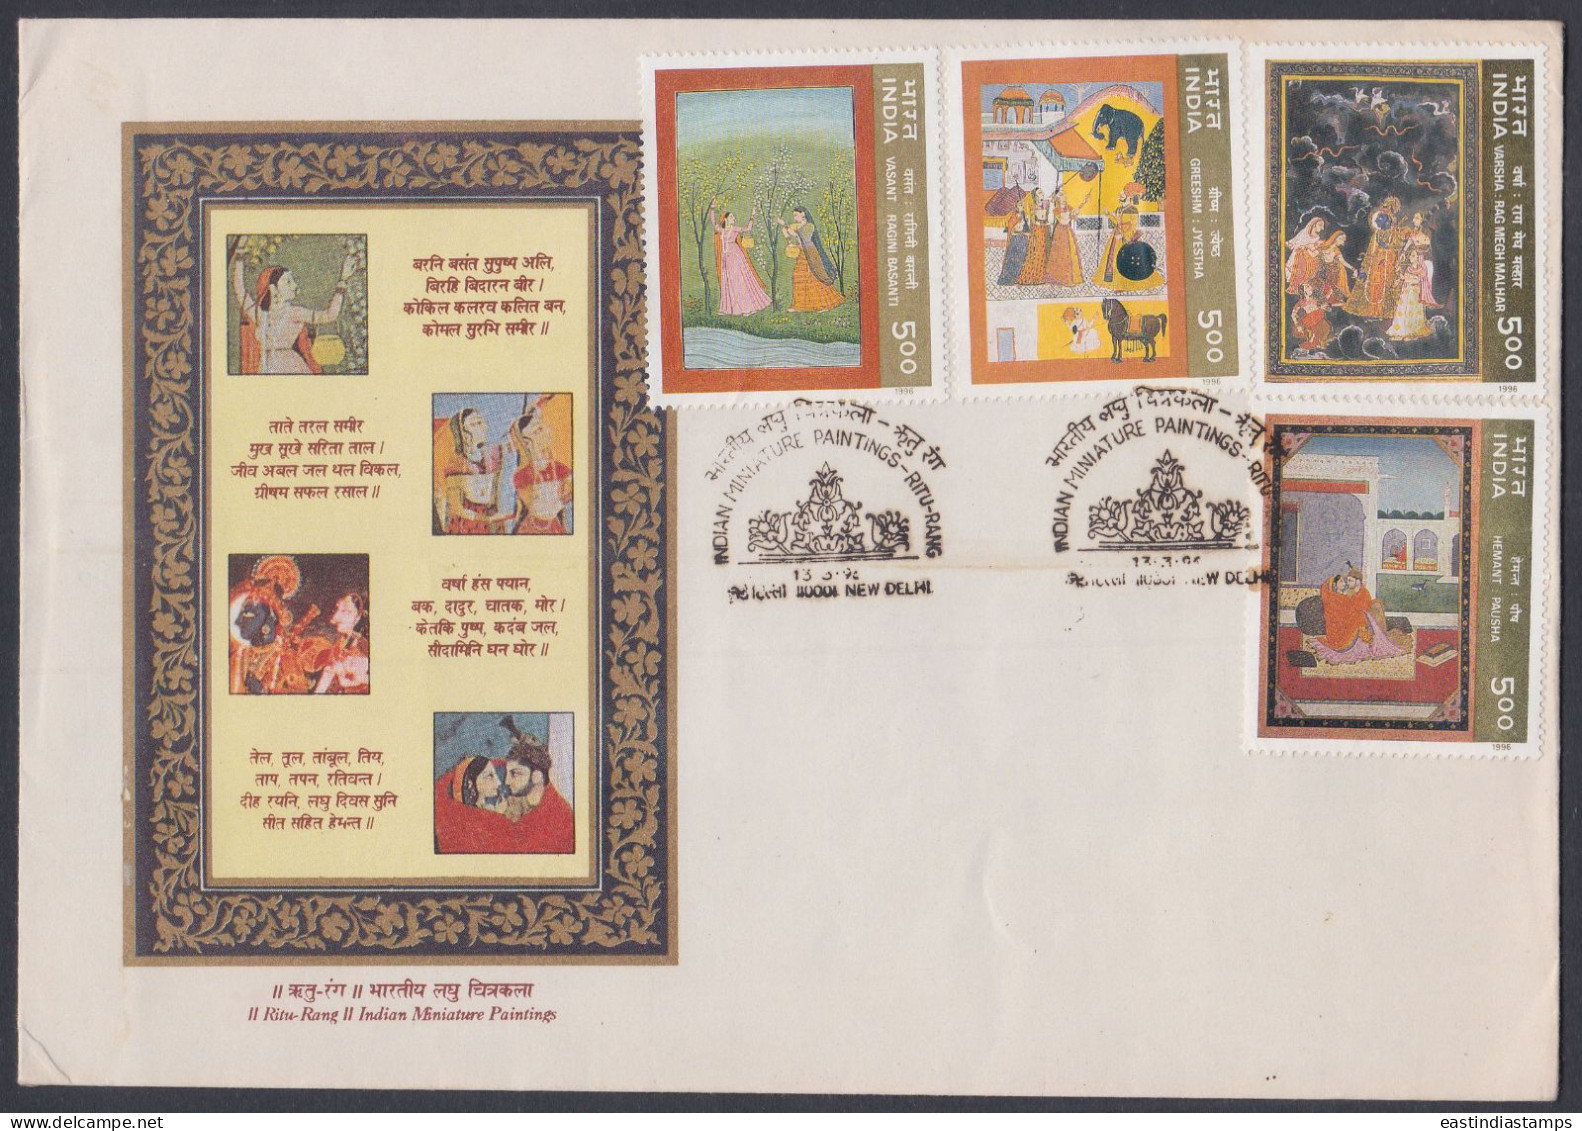 Inde India 1996 FDC Indian Miniature Paintings, Painting, Art, Arts, Painter, Horse, Royalty, Elephant, First Day Cover - Storia Postale